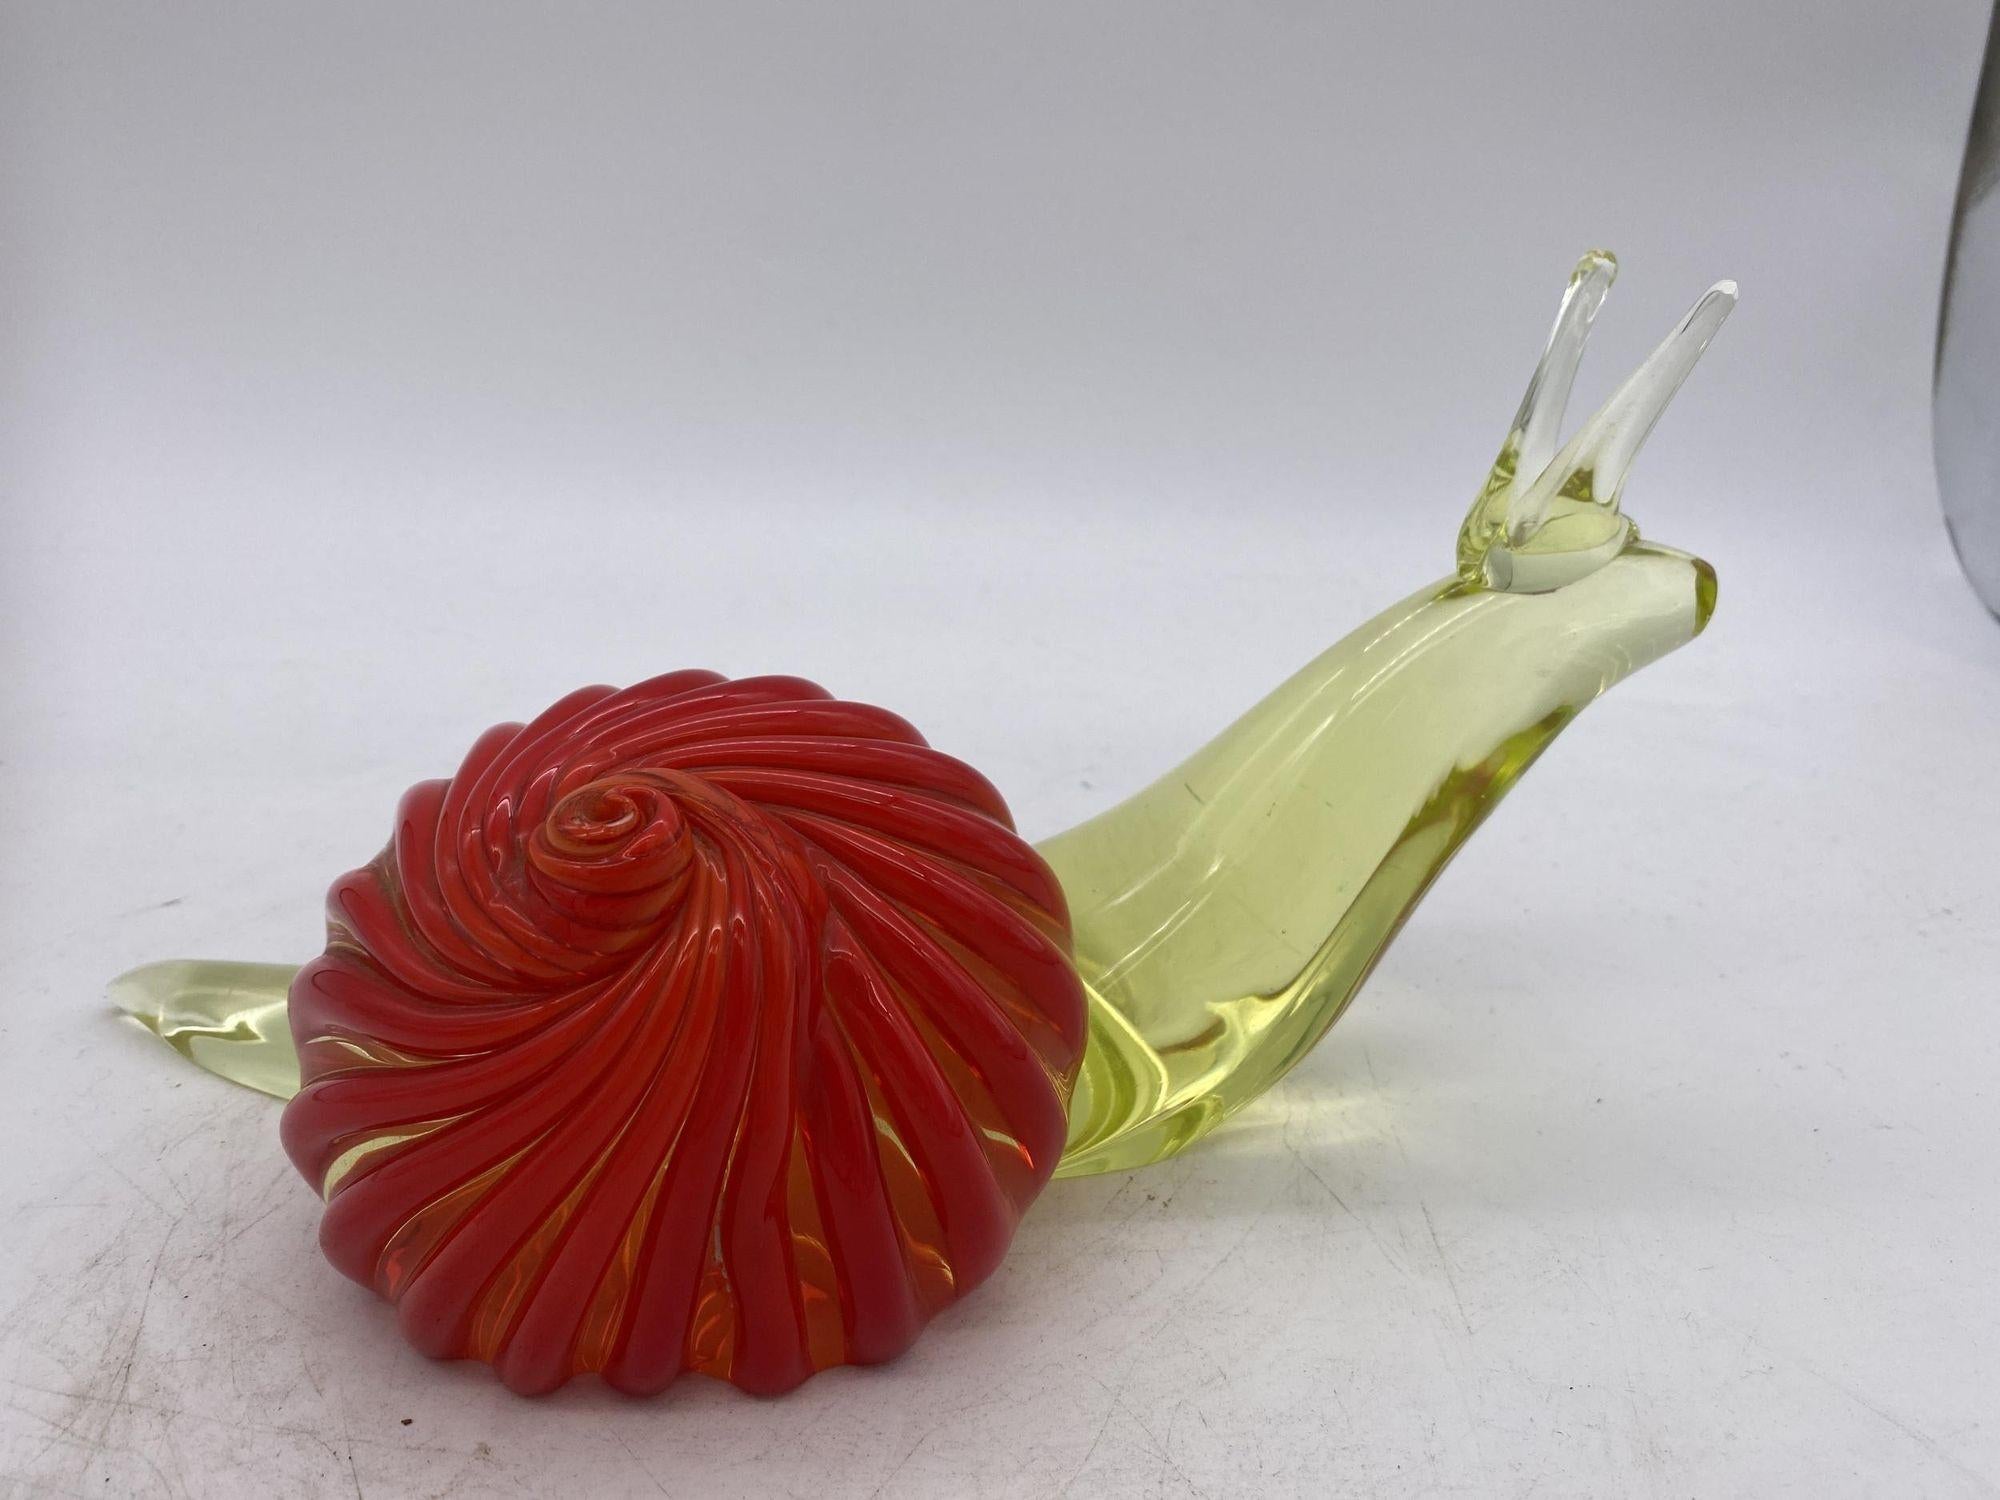 Murano glass Snail sculpture Yellow and Red glass. The sculpture is made entirely by hand in the furnace and its shape and its details are given without the use of molds. With great attention to detail, it is a full expression of Venetian art as